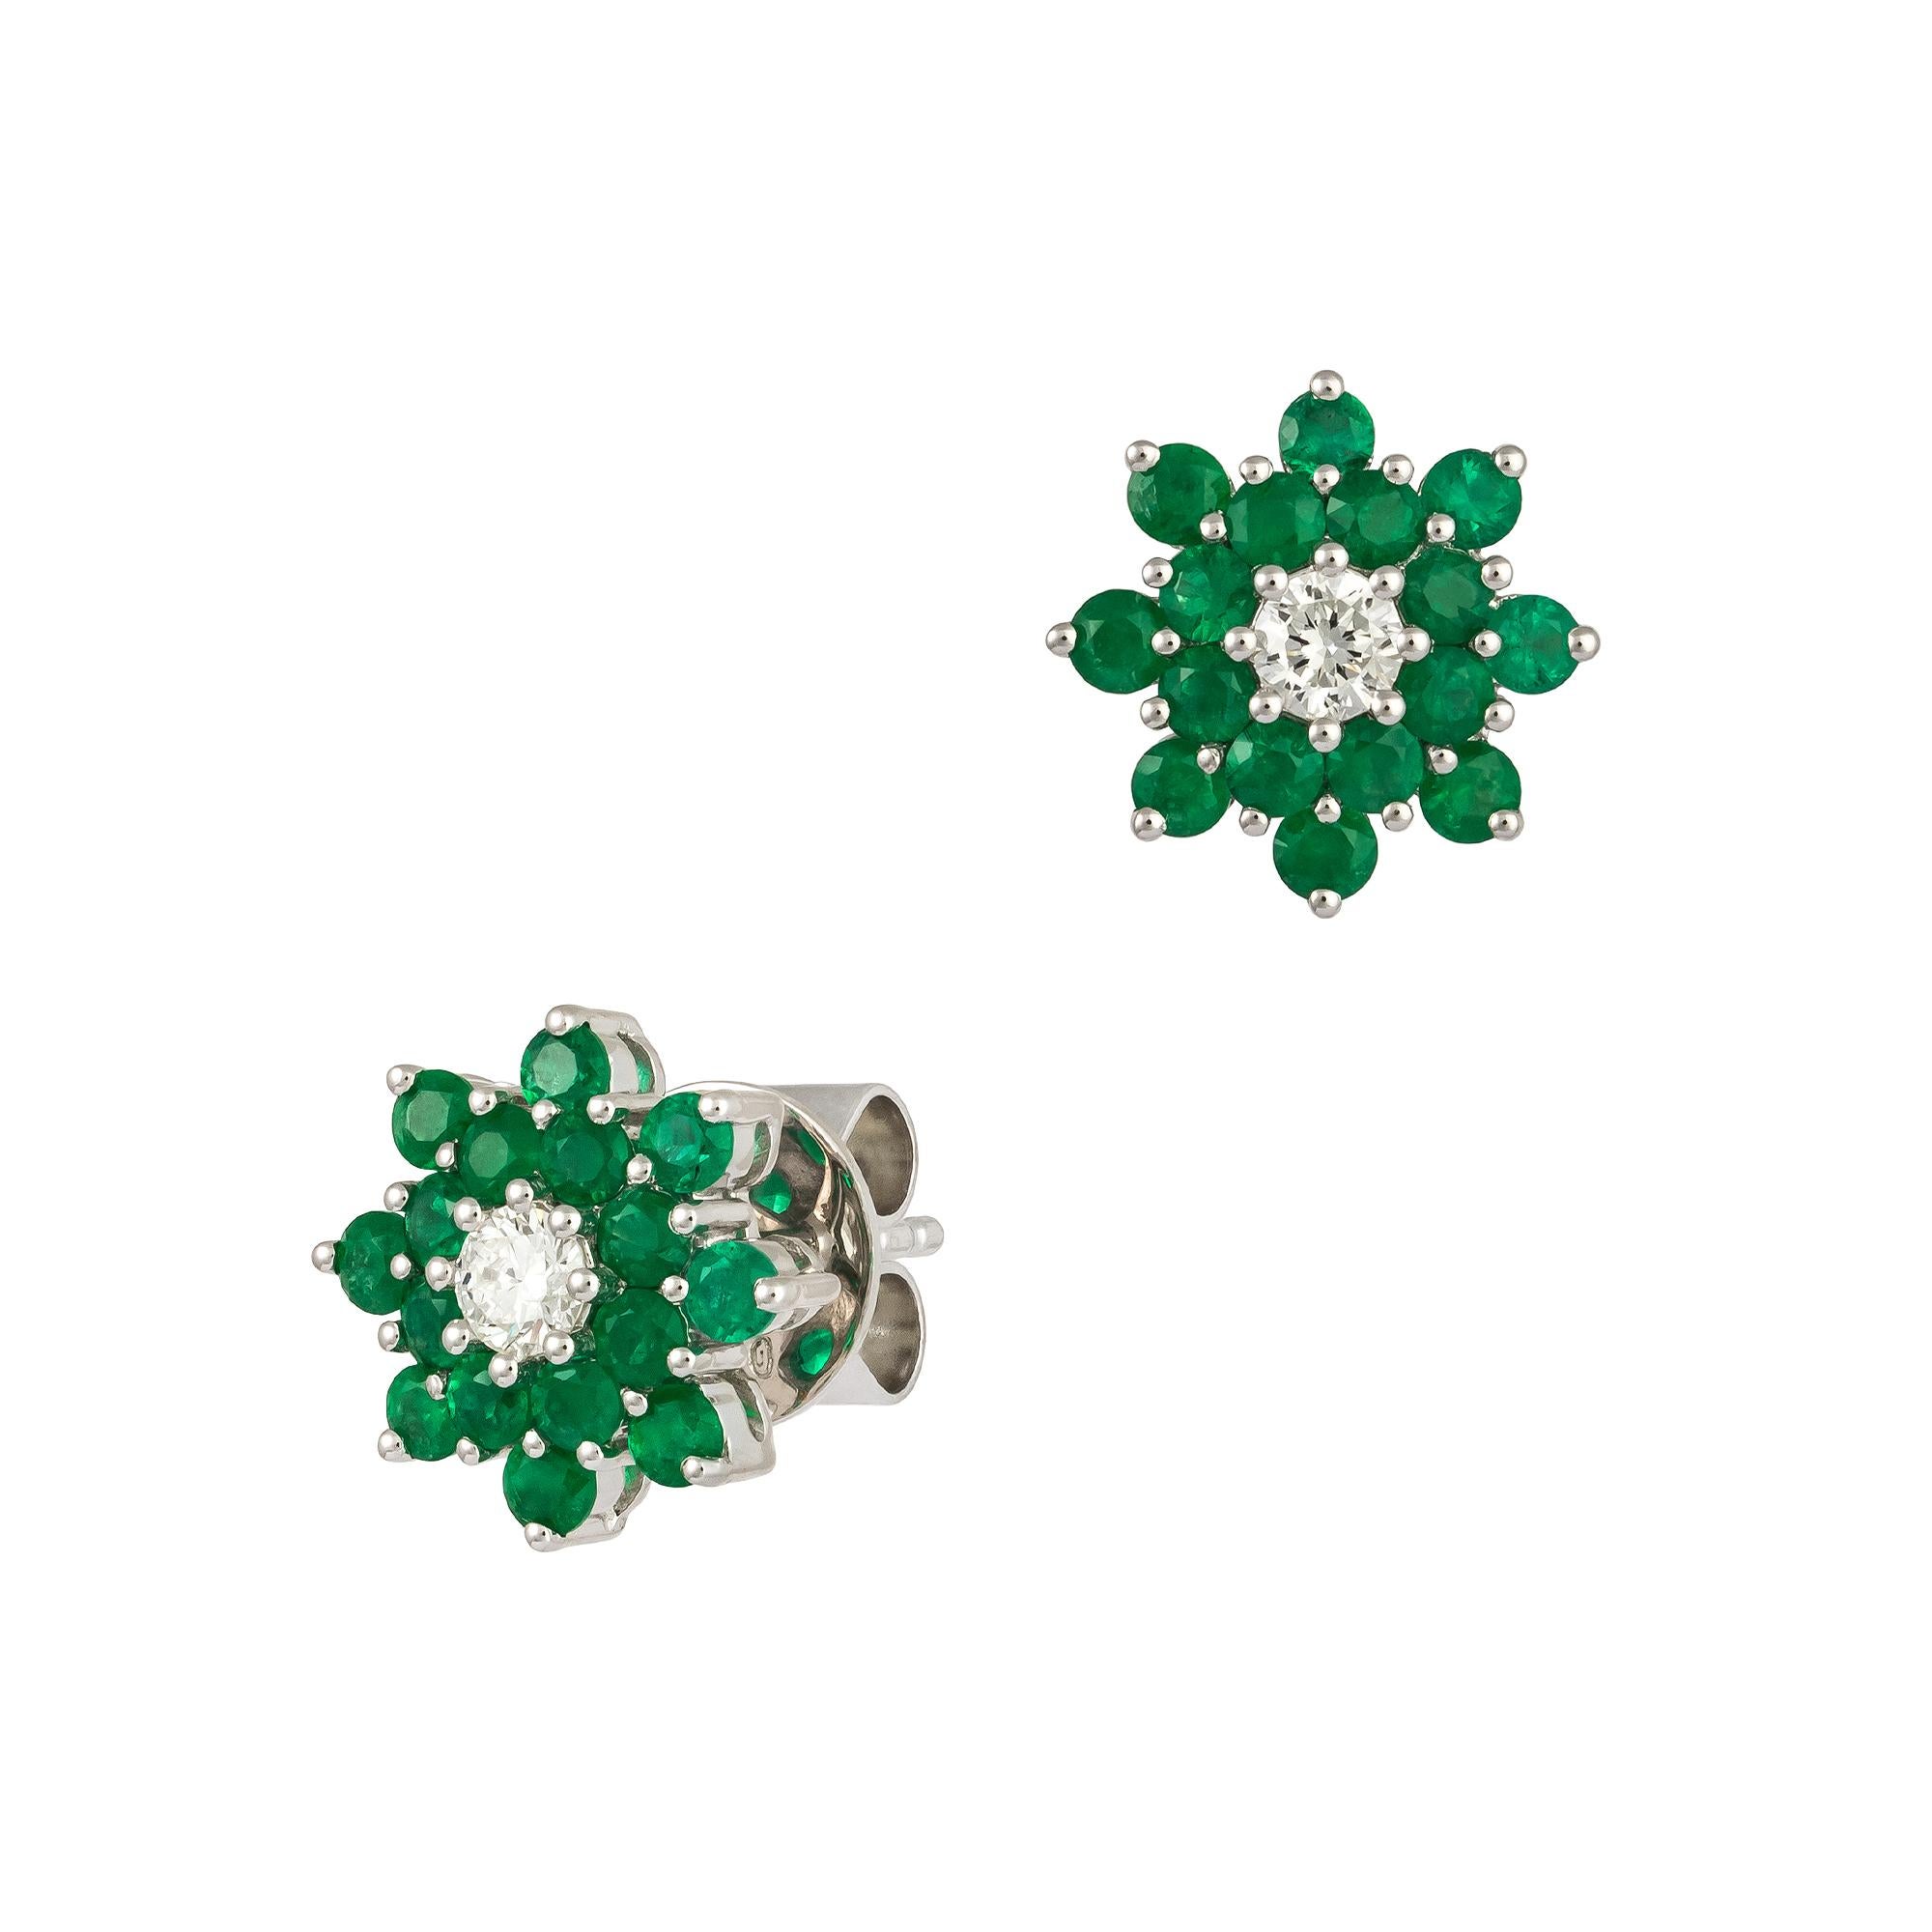 EARRING 18K White Gold, Diamond 0.19 Cts/2 Pieces, Emerald 0.93 Cts/32 Pieces
